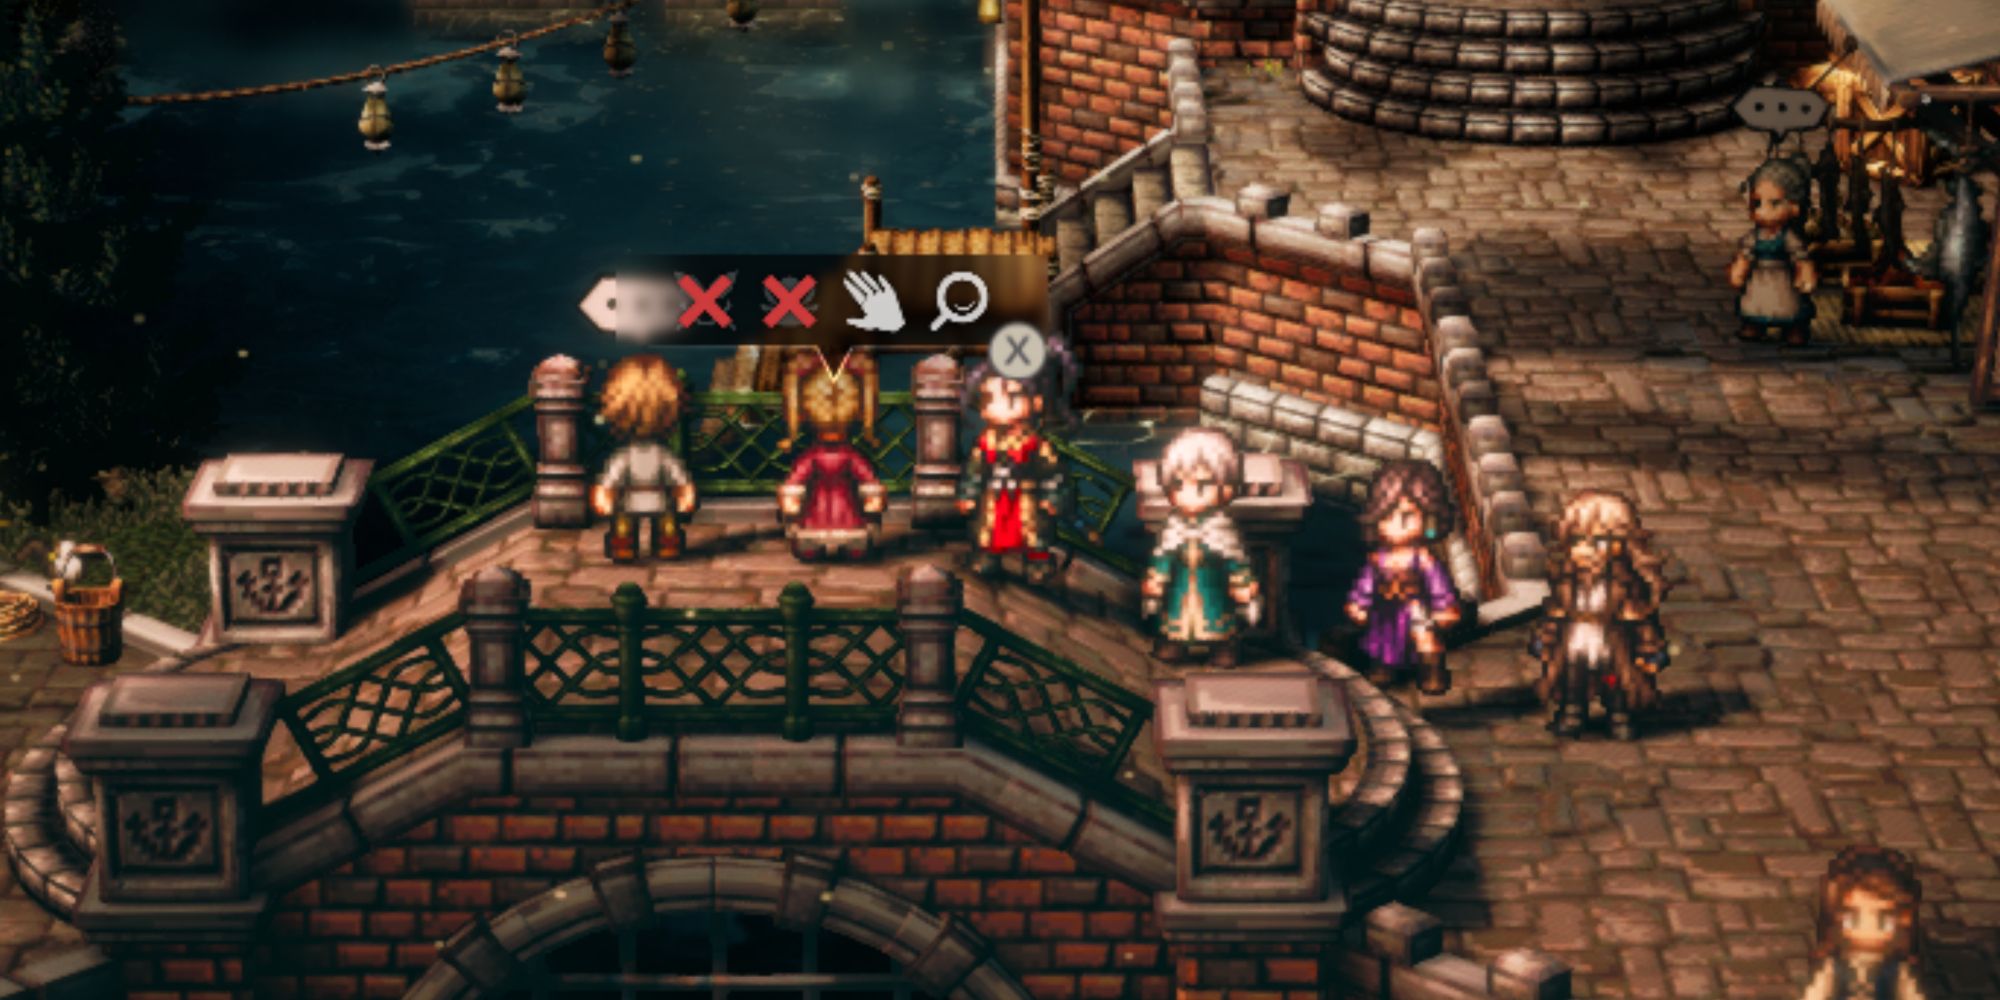 Octopath Traveler 2, Stealing from a Young Girl